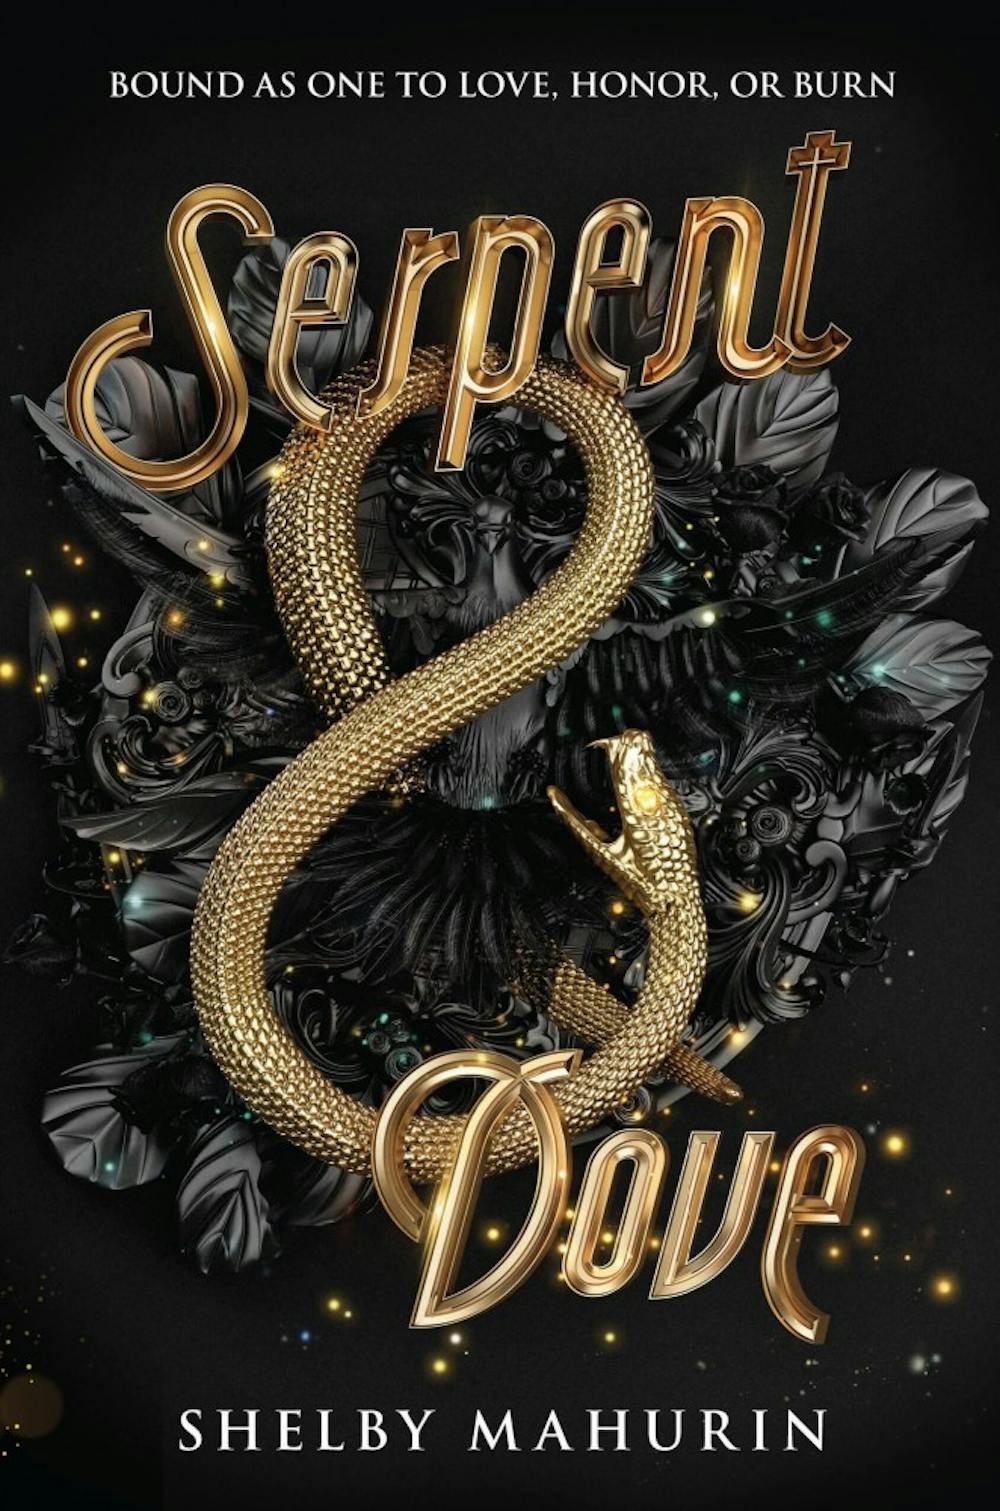 Opinion: Shelby Mahurin's Serpent & Dove is an experience full of magic and mystery 